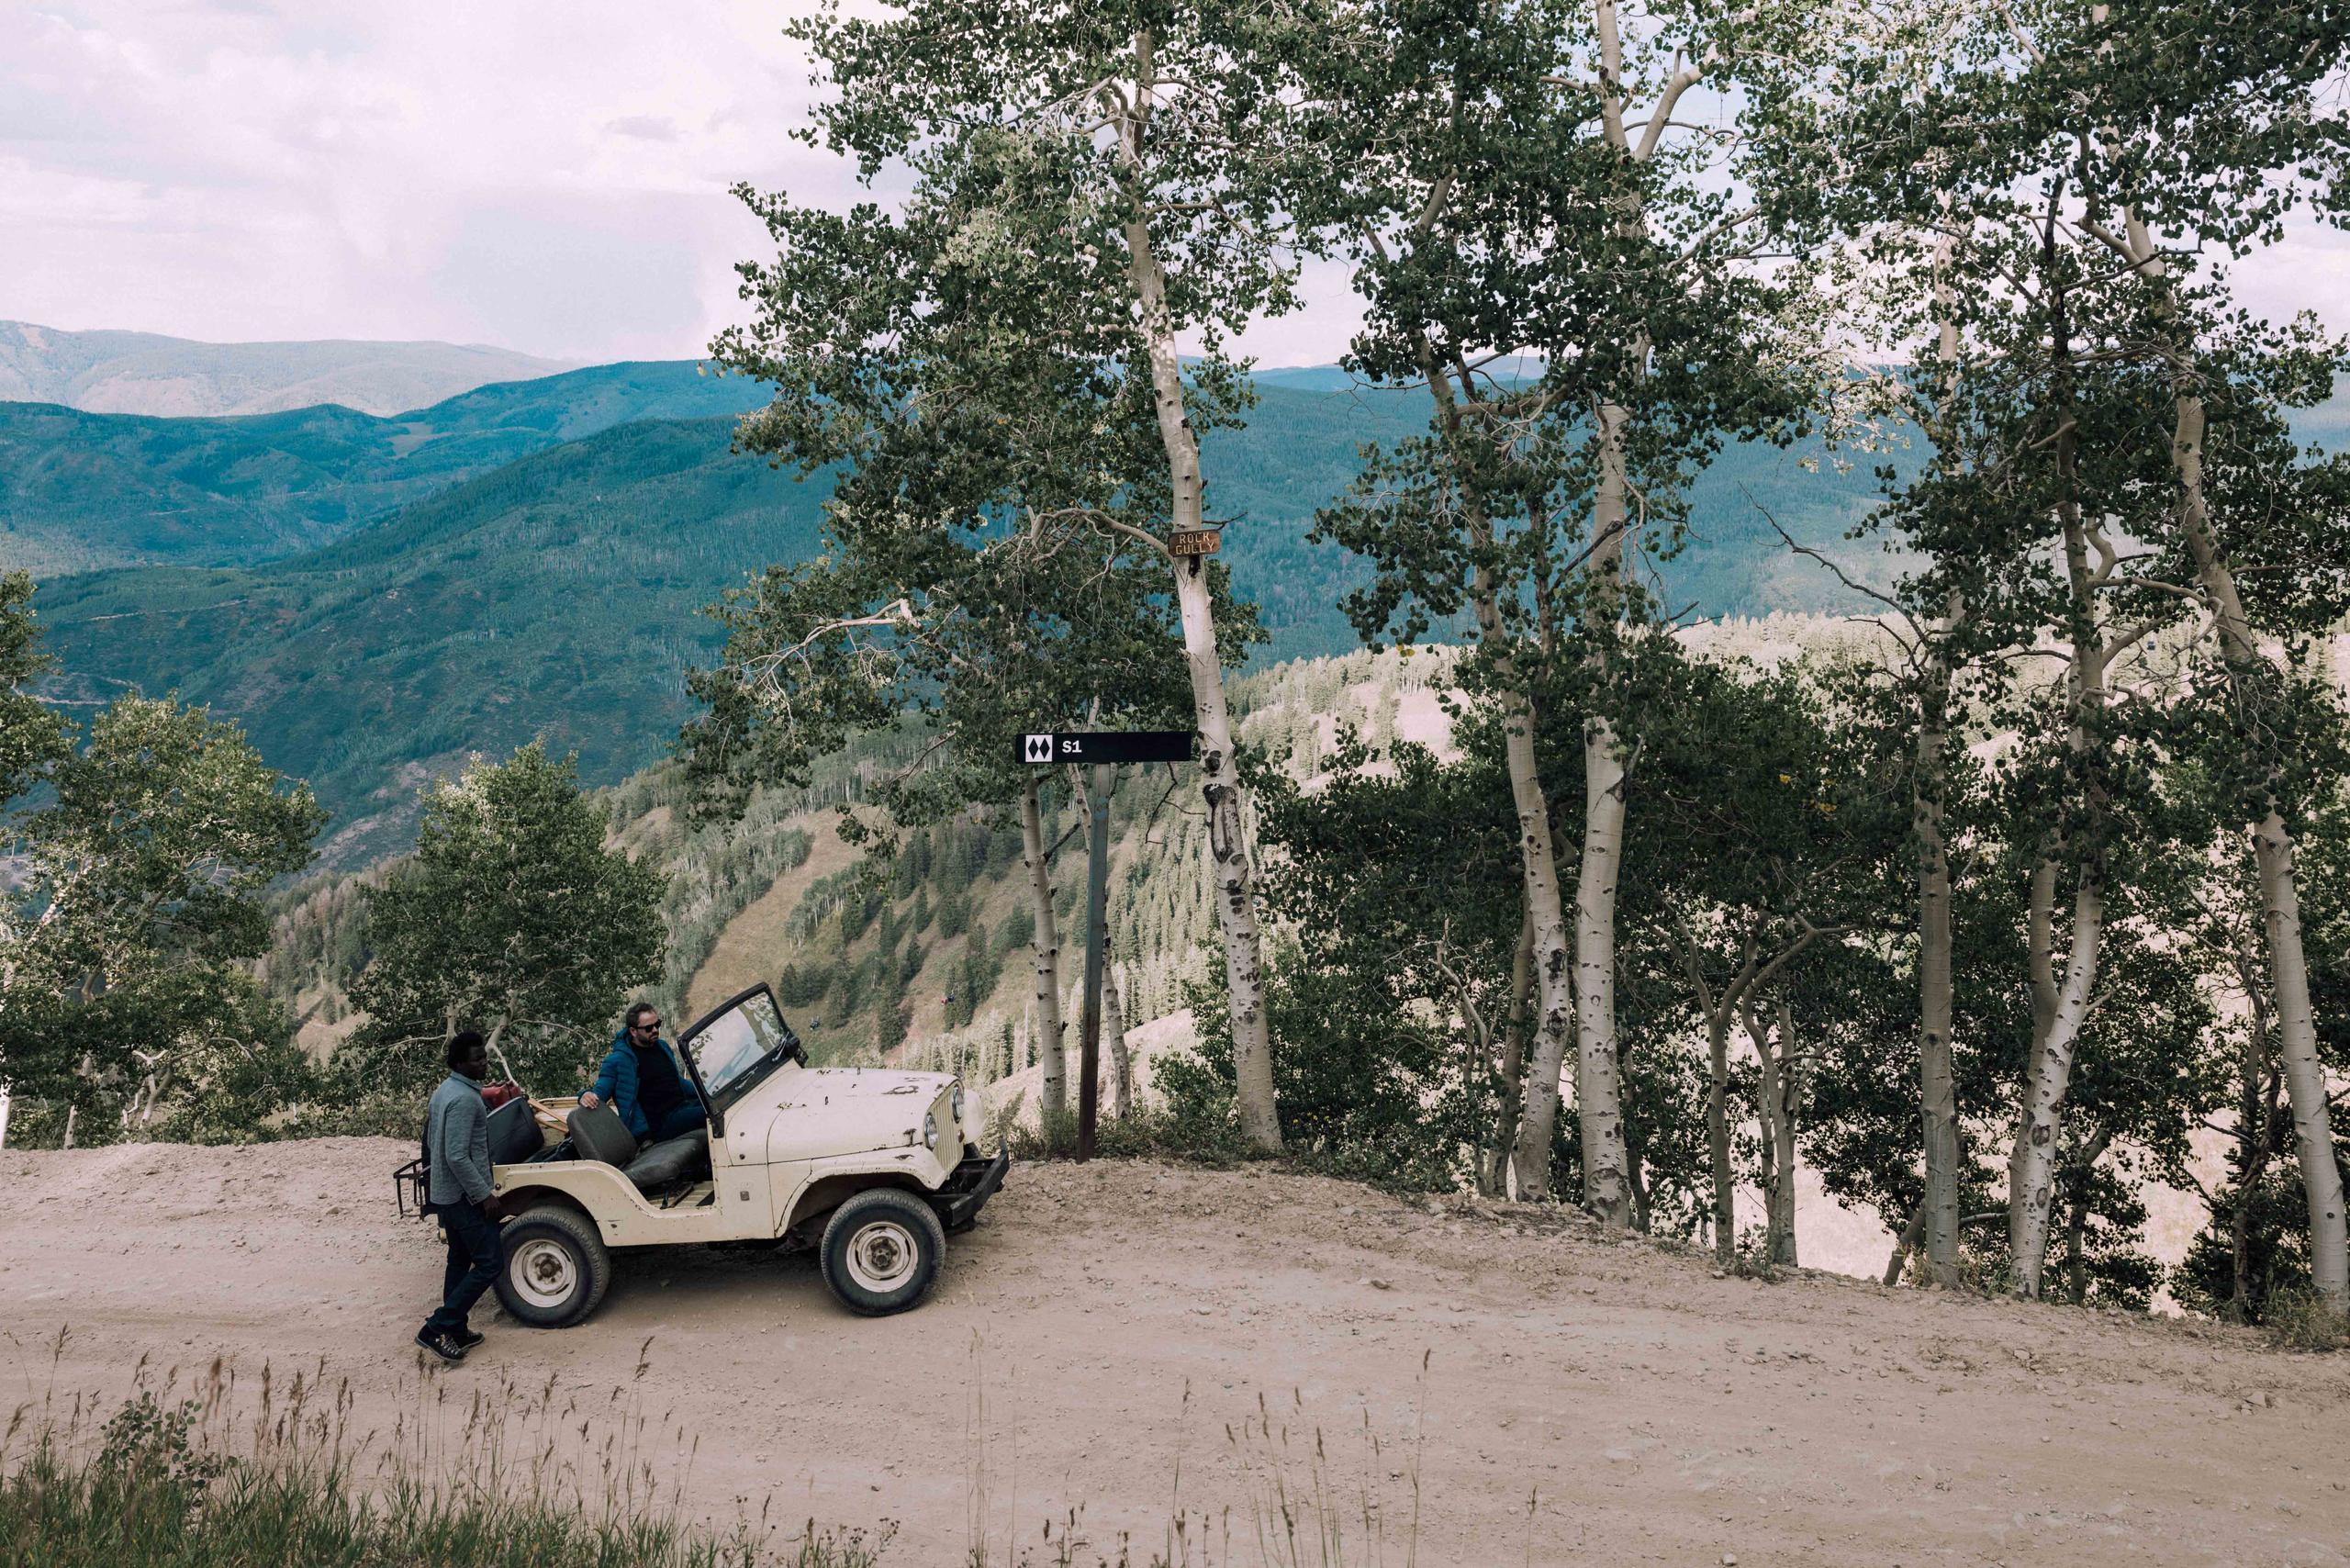 Aspen mountain landscape with two men in vintage Jeep on dirt road in foreground